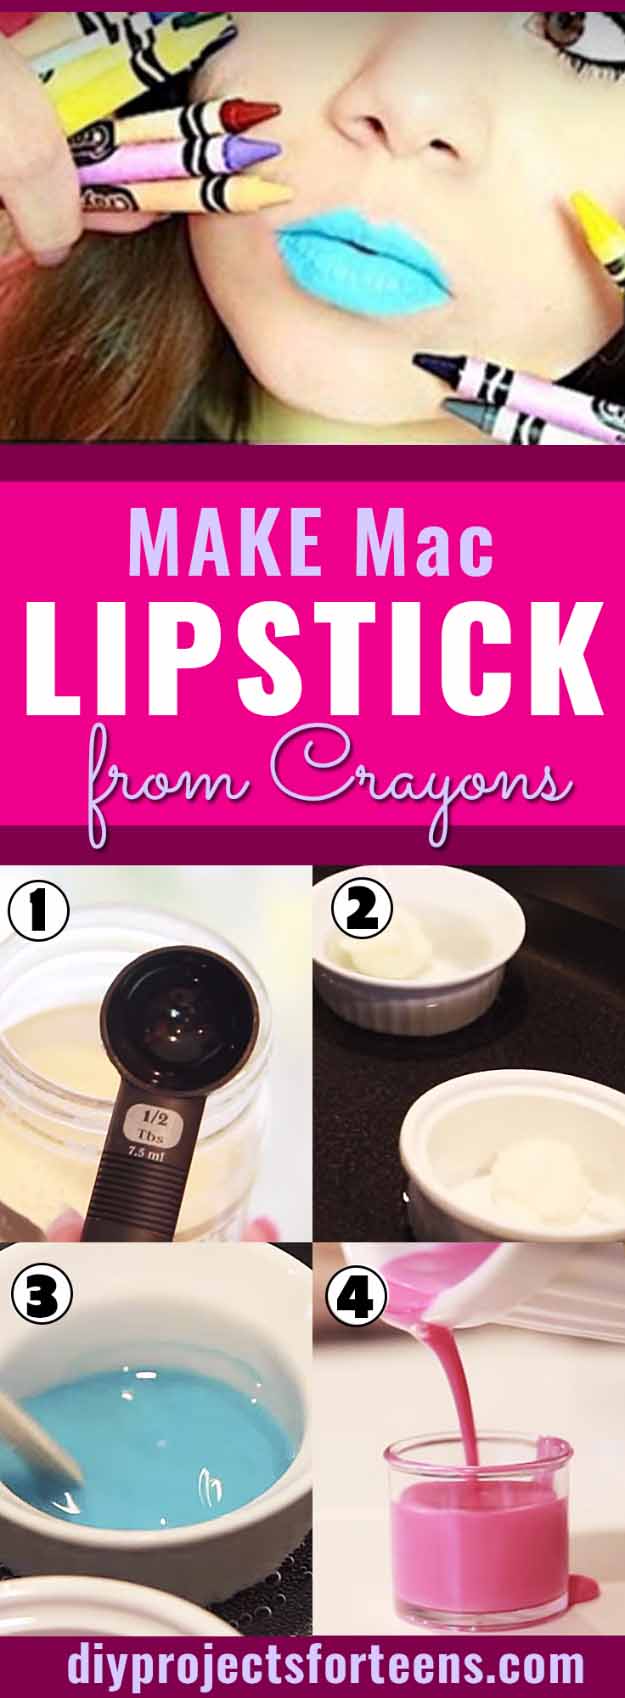 Cool Crafts You Can Make for Less than 5 Dollars | Cheap DIY Projects Ideas for Teens, Tweens, Kids and Adults | Make Mac Lipstick from Crayons #teencrafts #cheapcrafts #crafts/